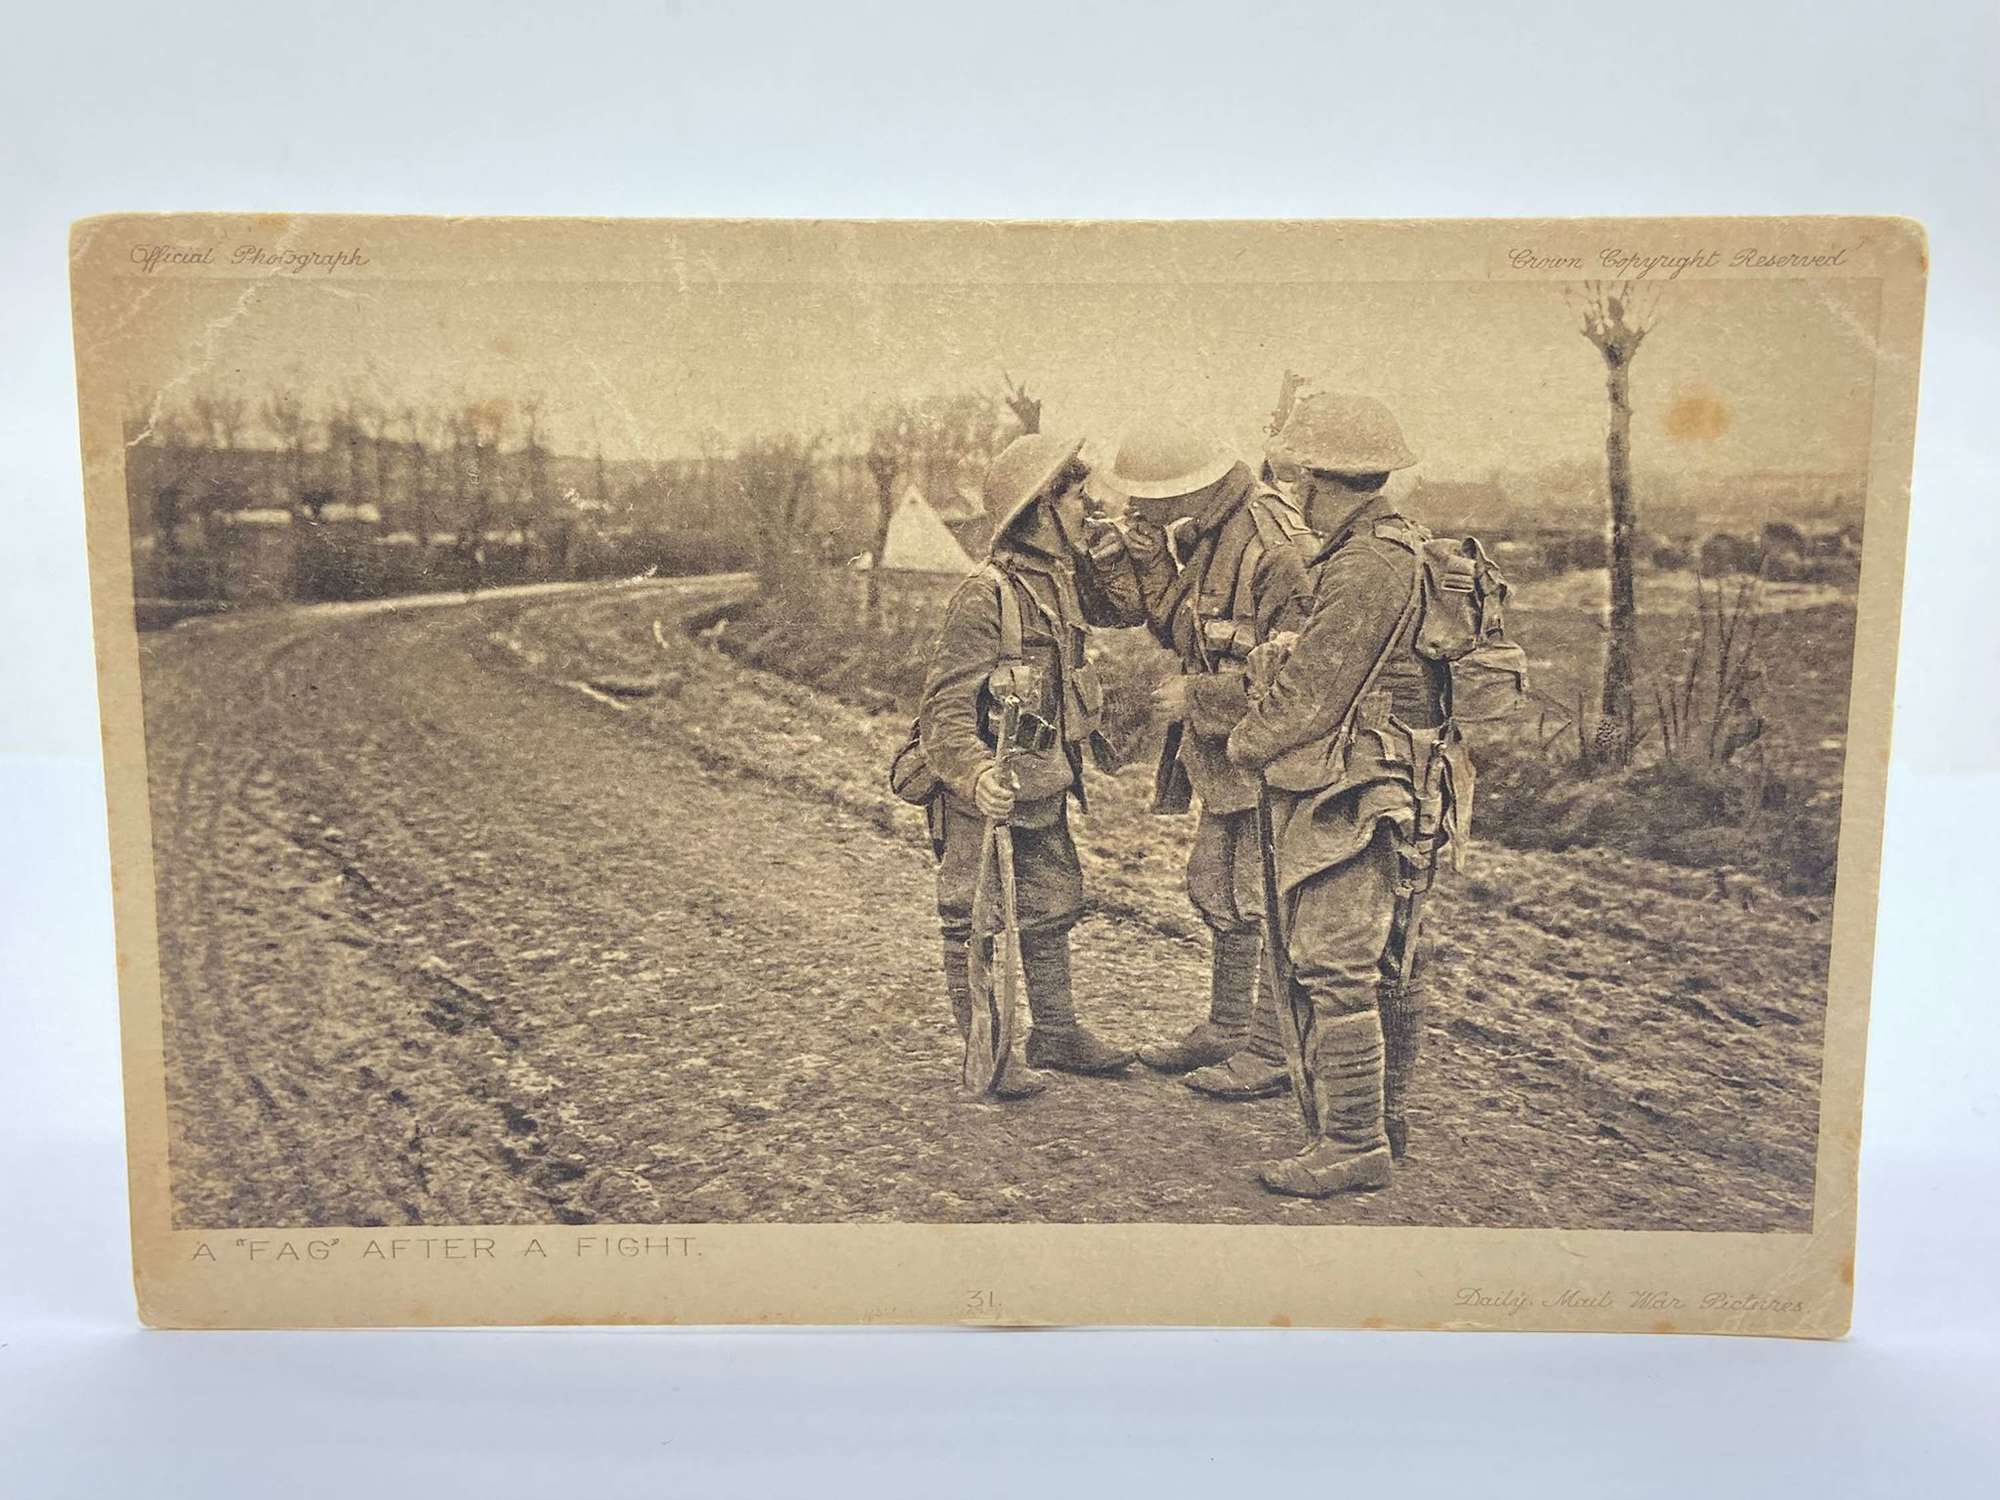 WW1 British “A Fag After A Fight” Daily Mail War Pictures Postcard